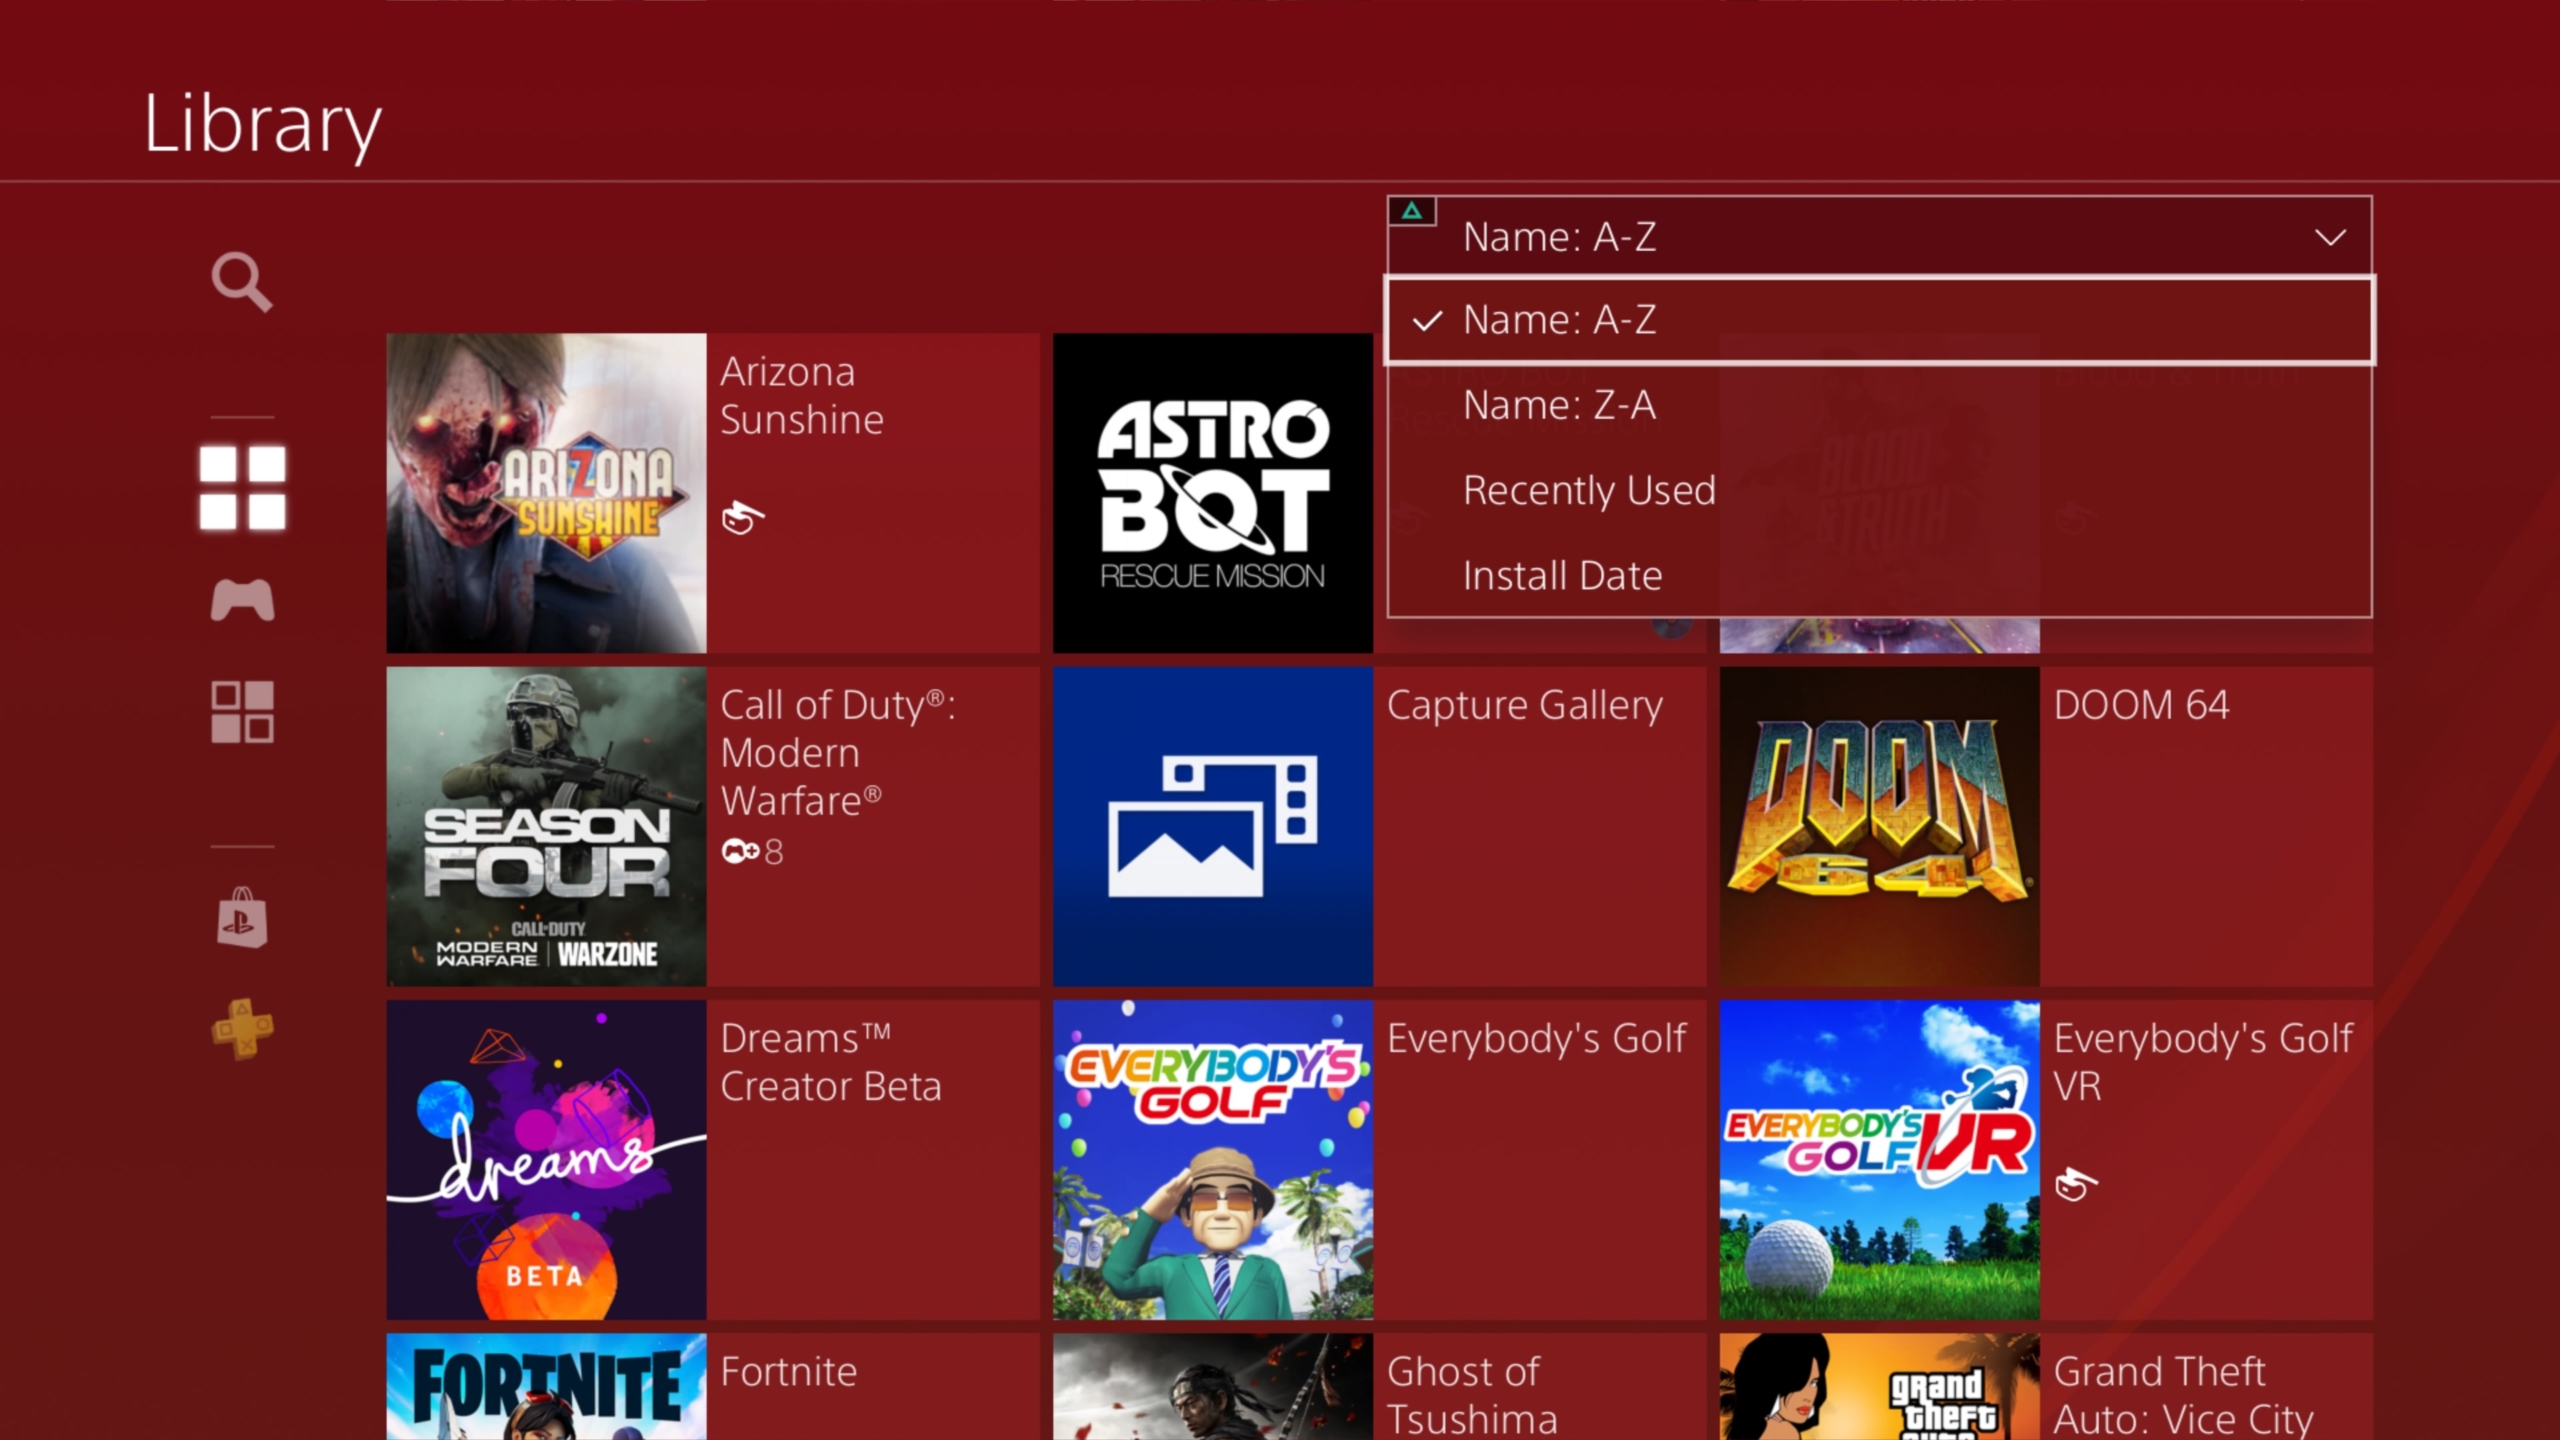 How to Organize Your PS4 Library Make Custom Folders Digital Trends